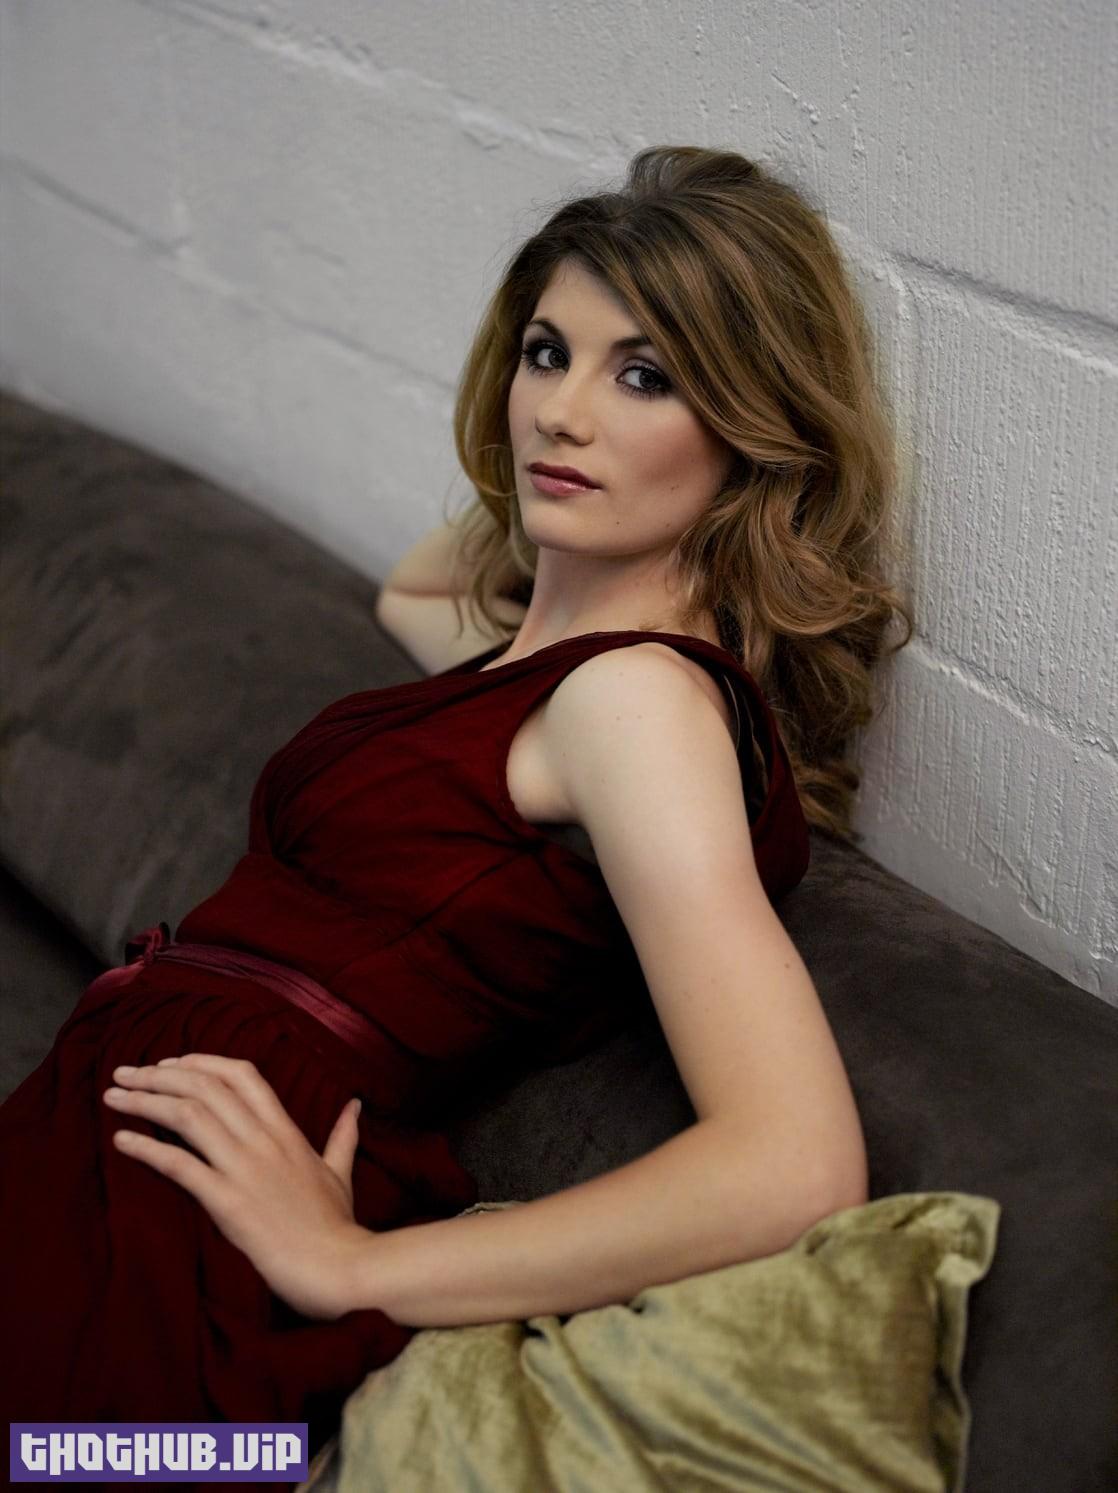 1667161033 976 Jodie Whittaker Nude ANd Sexy Goctor Who 38 Photos